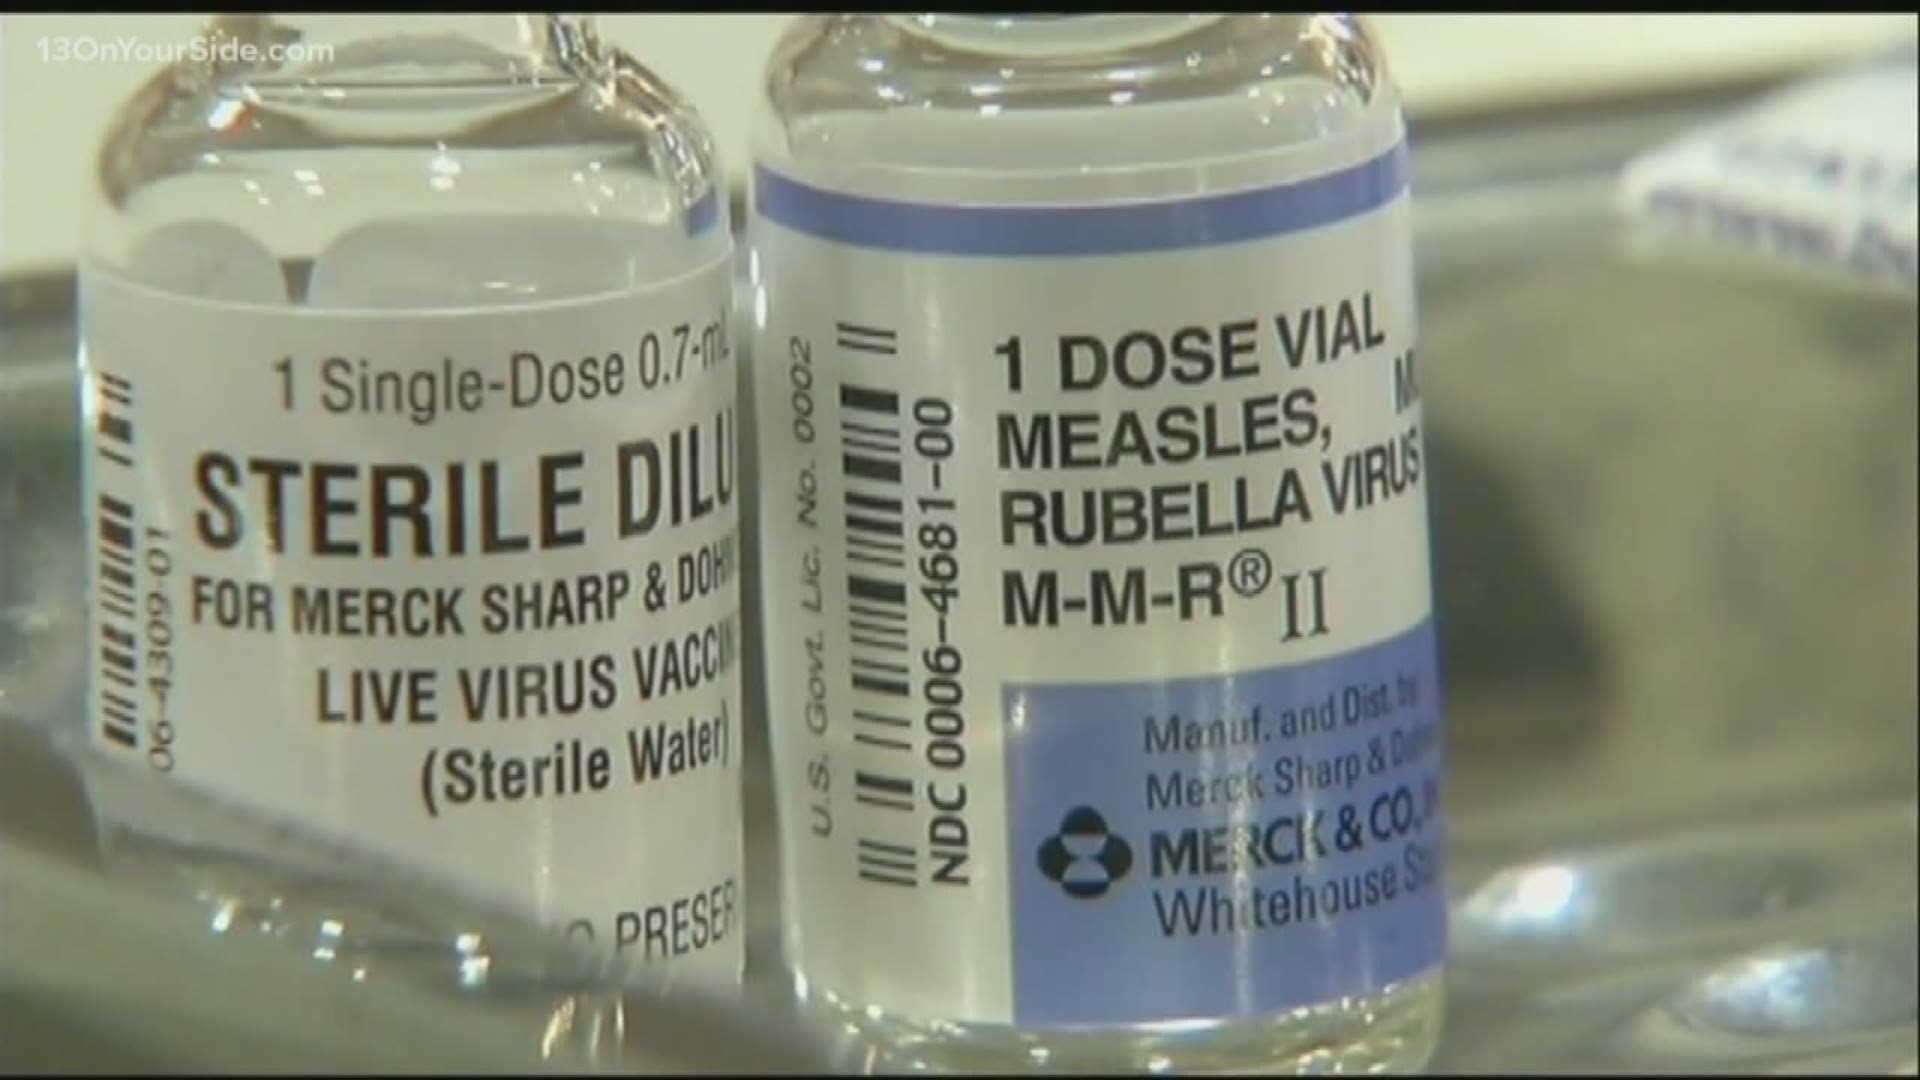 Health officials in Michigan's northern Lower Peninsula are urging people to watch for measles symptoms after a young woman who recently traveled to Ukraine was confirmed to have the highly contagious disease.